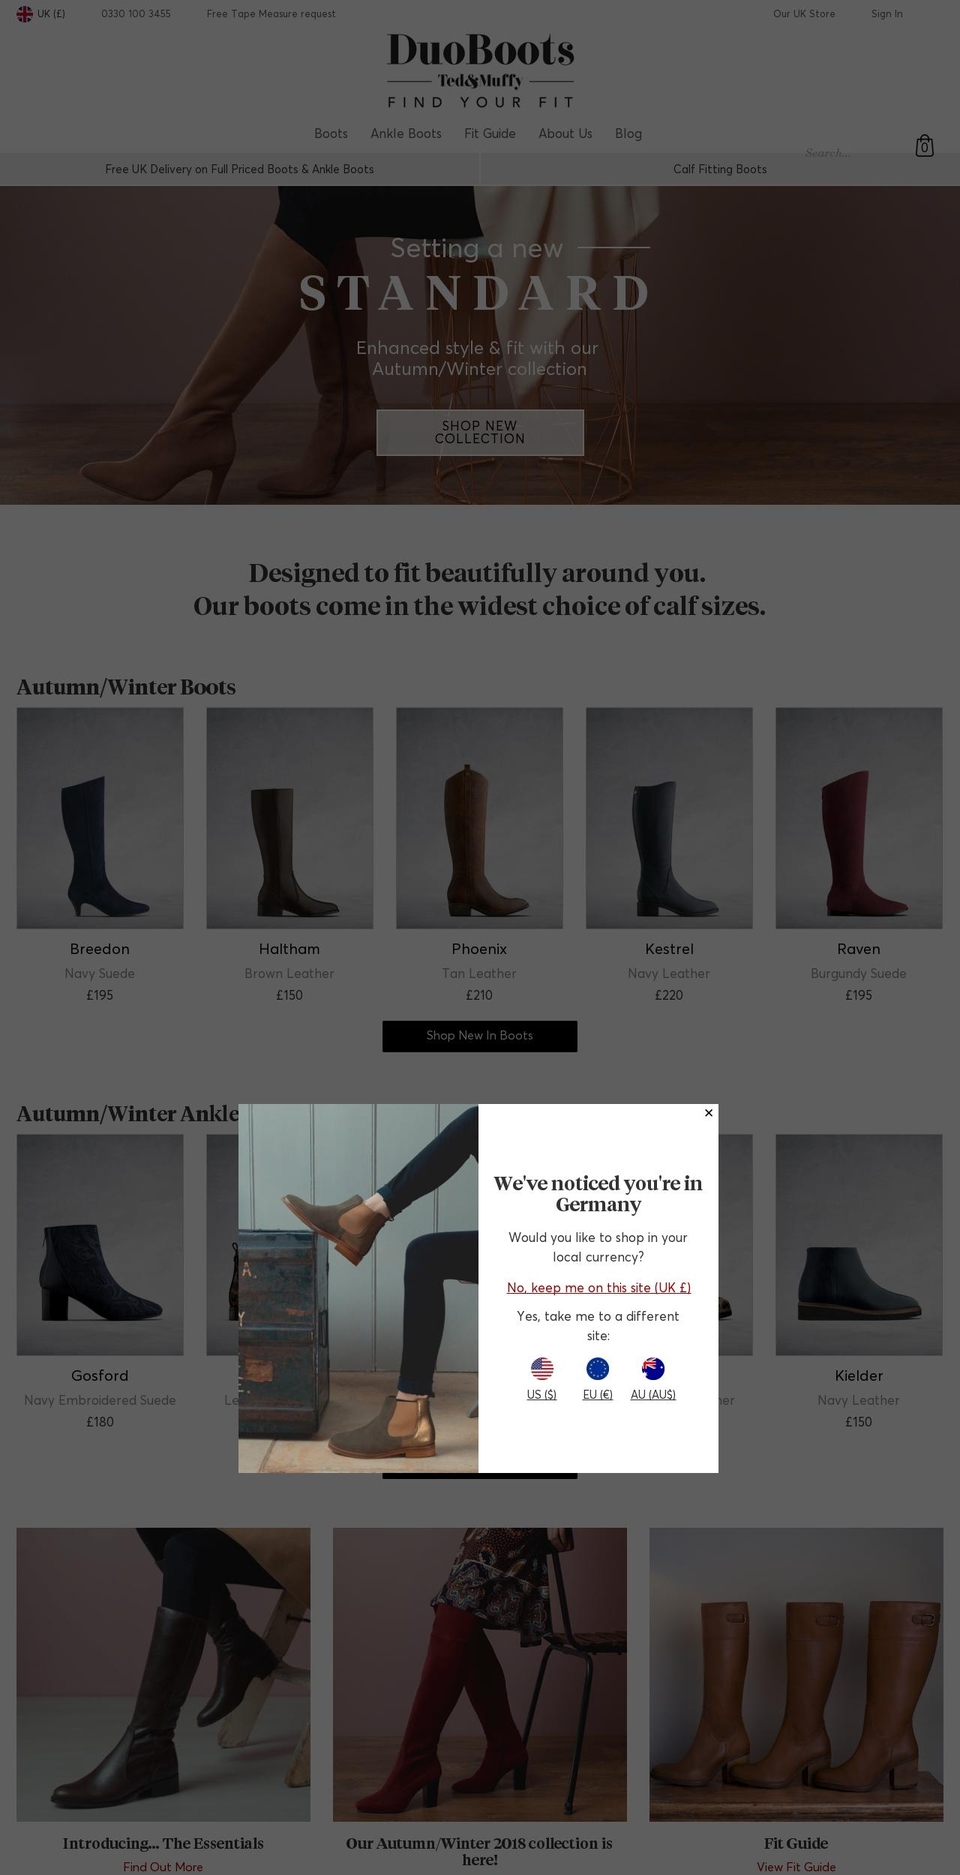 DuoBoots GBP V4.2 Shopify theme site example duoboots.cheap